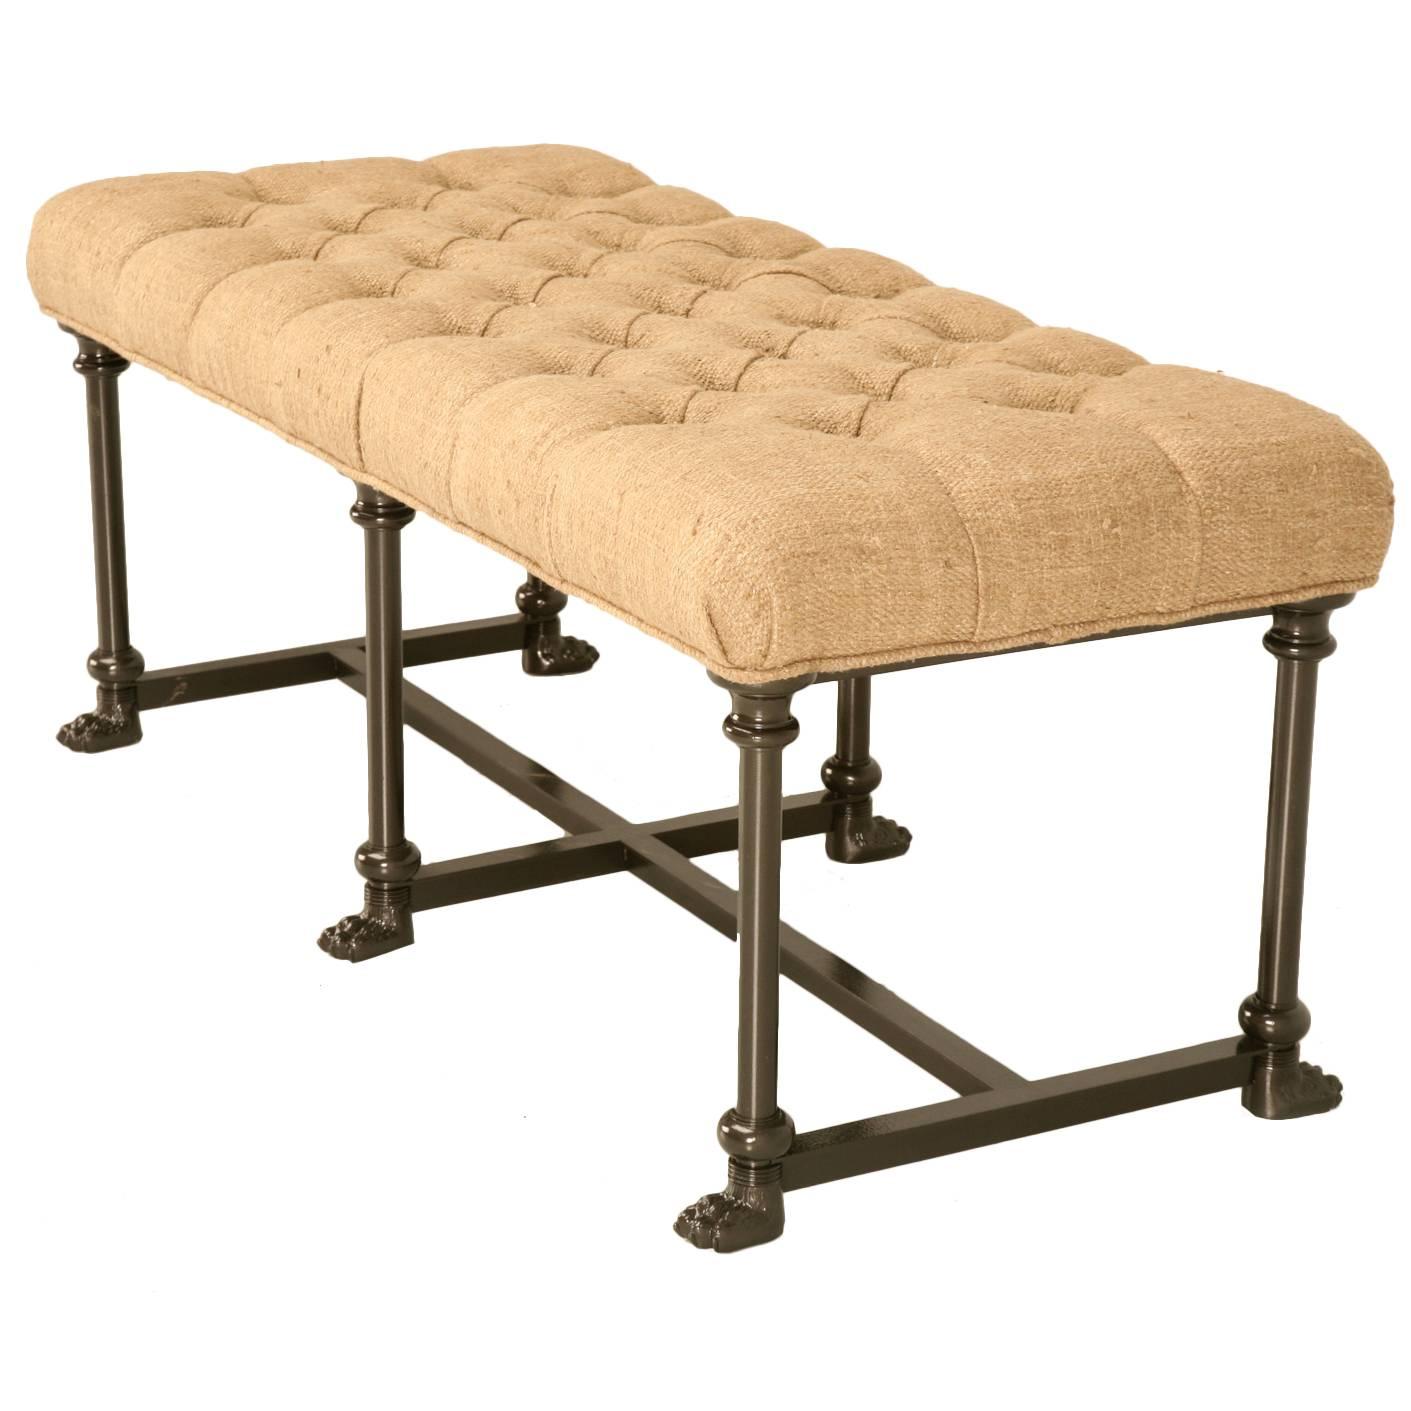 Custom-Made Bench with Steel Frame and Tufted Seat Available in Any Dimension For Sale